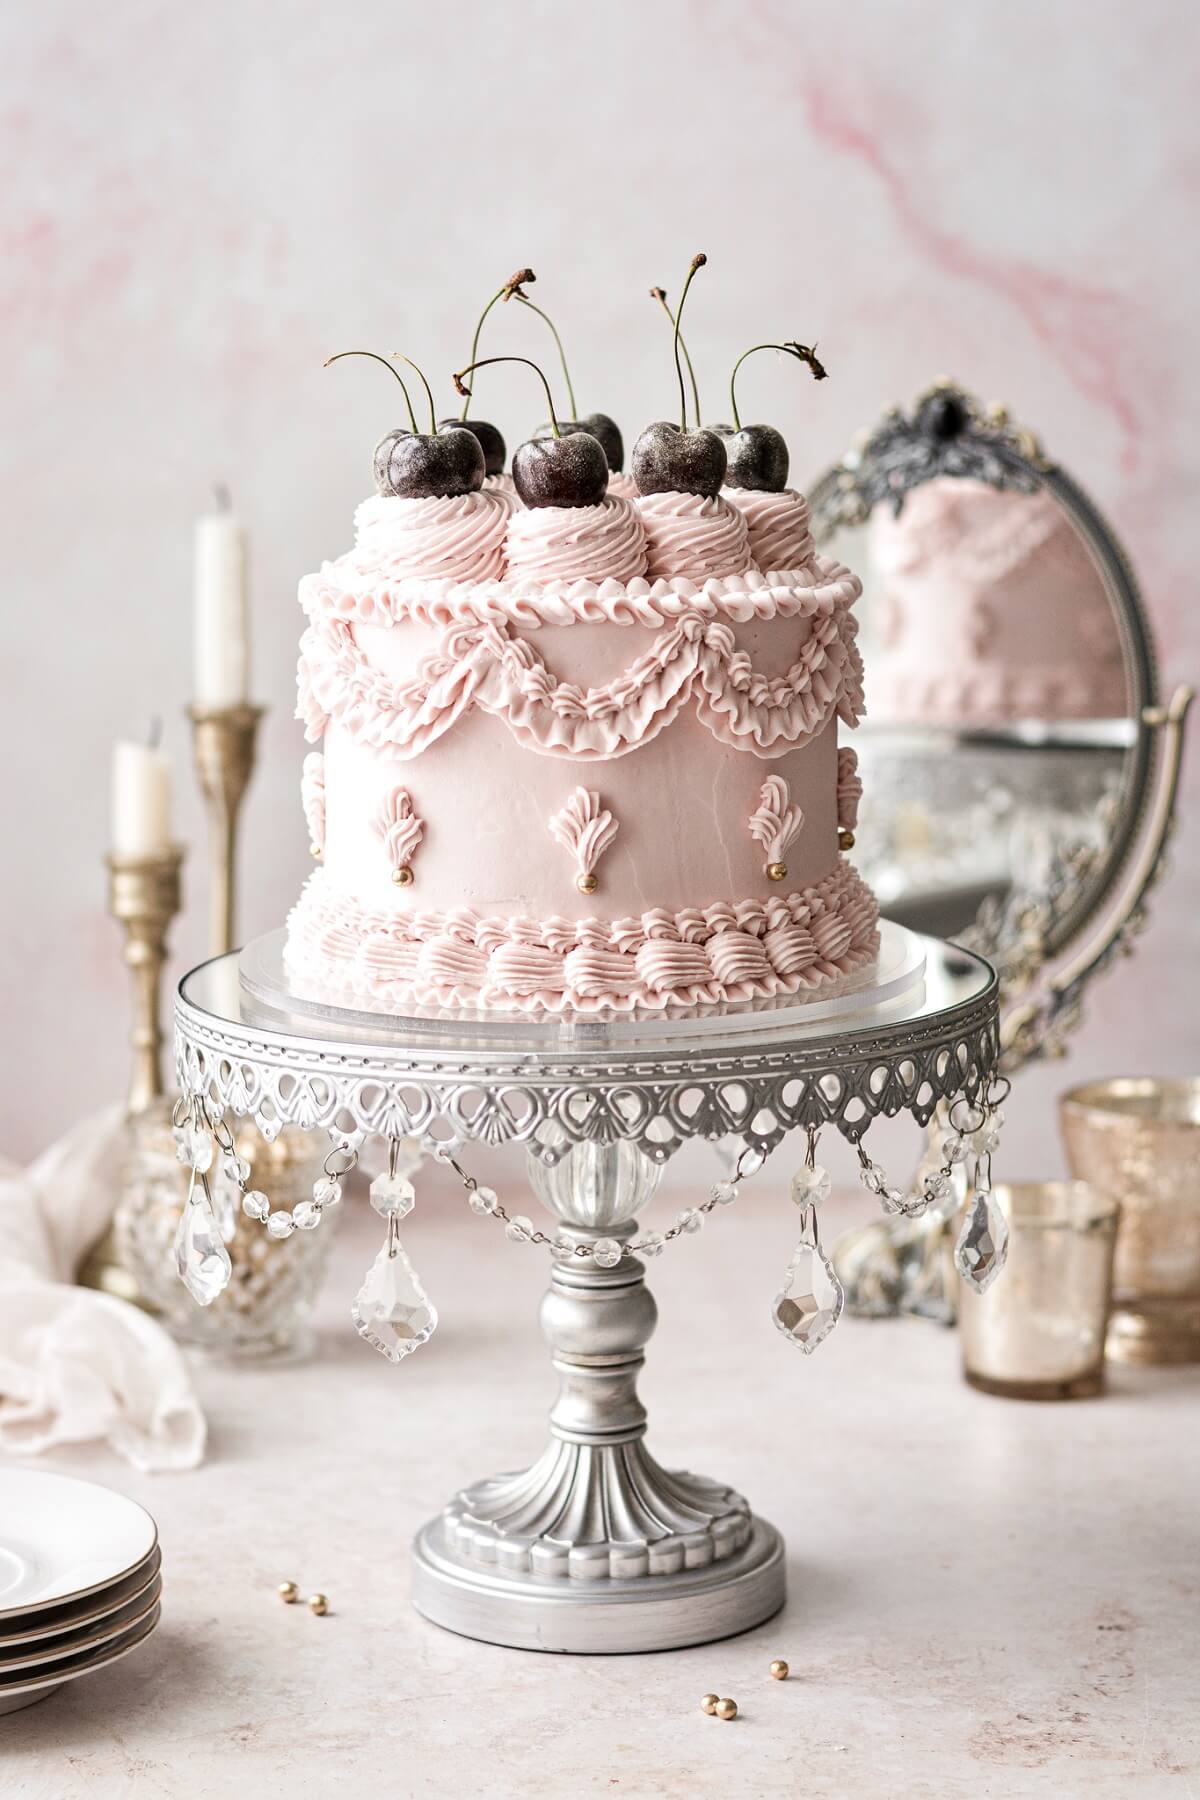 Pink chocolate cherry lambeth cake on a silver cake stand.